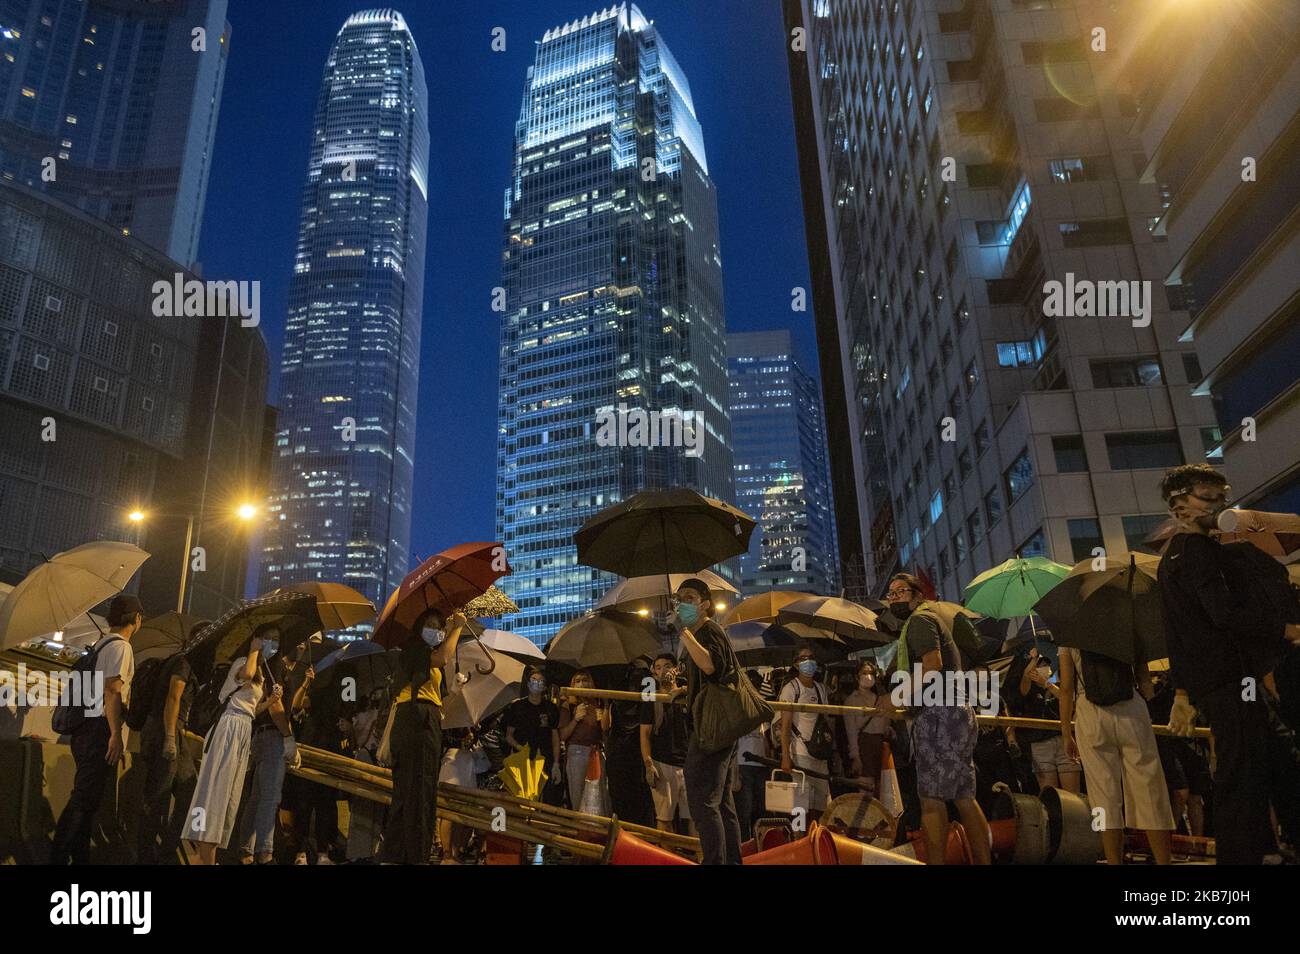 Protesters are seen setting a roadblock in Hong Kong on October 4, 2019, Hong Kong invoked emergency powers for the first time in more than half a century to ban face masks for protesters after months of unrest, prompting demonstrators to occupy downtown streets and forcing the metro operator to shut down all services late Friday. (Photo by Vernon Yuen/NurPhoto) Stock Photo